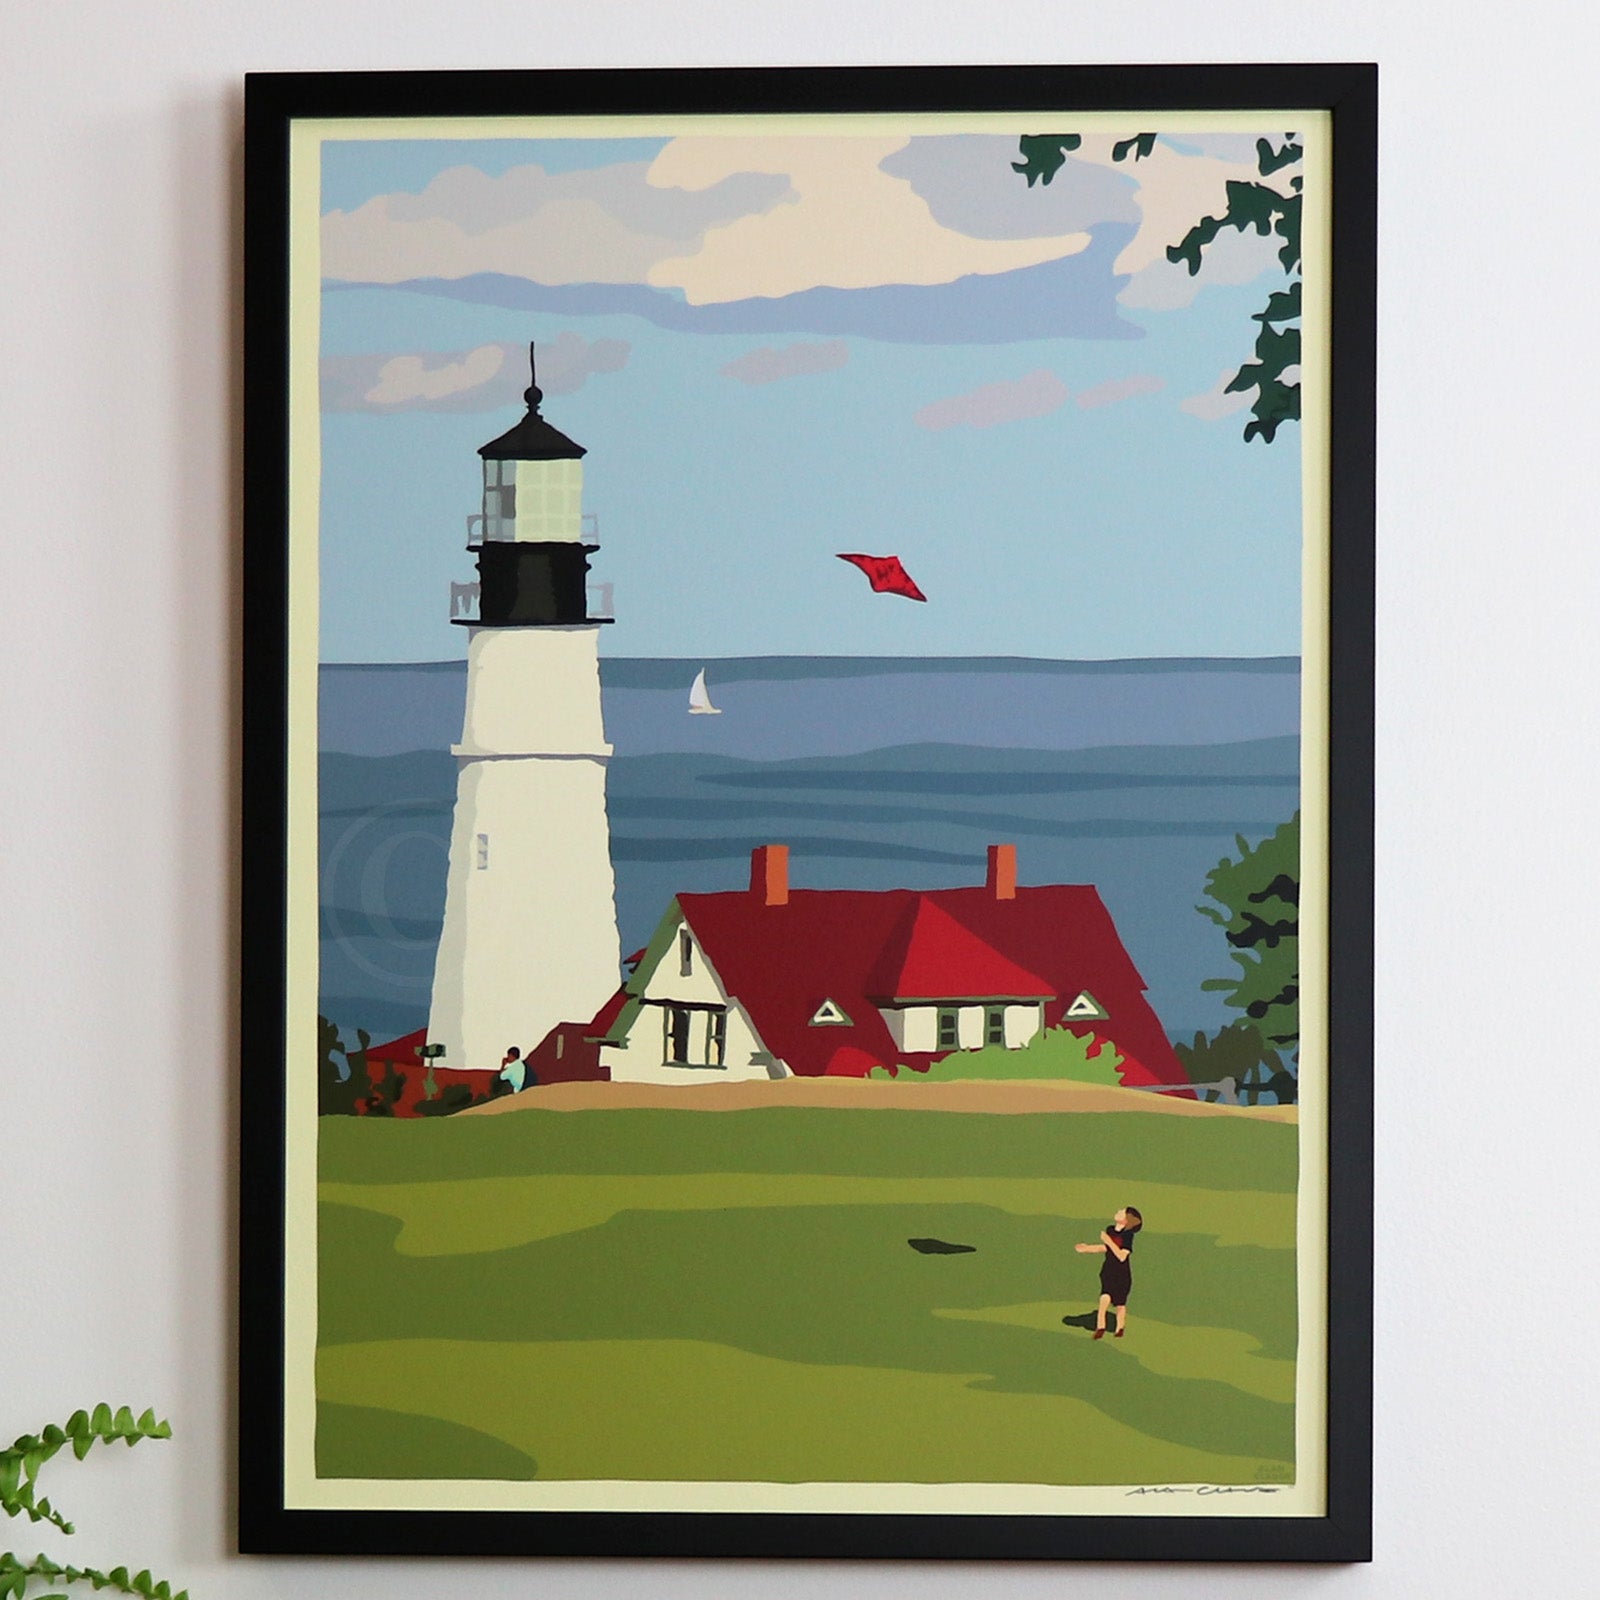 Fly Kite Fly at Portland Head Light Art Print 18" x 24" Framed Wall Poster By Alan Claude - Maine